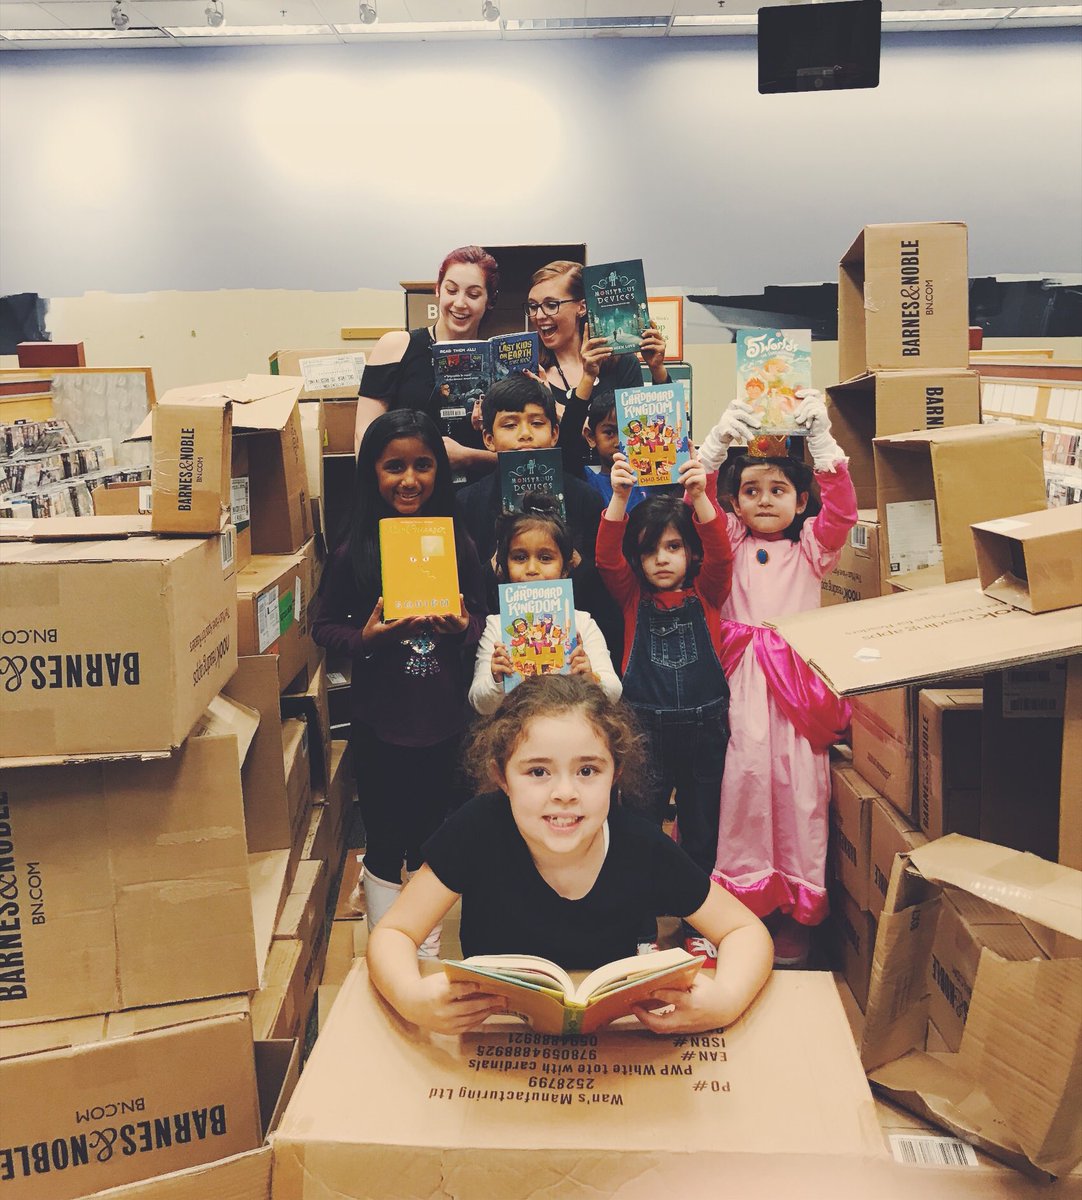 Check out our very own Cardboard Kingdom! Thank you to everyone who came out for our Kids Book Hangout! We can’t wait for the next one. Be sure to like us on Facebook to keep up with our upcoming events. #bnhangout @bnbuzz